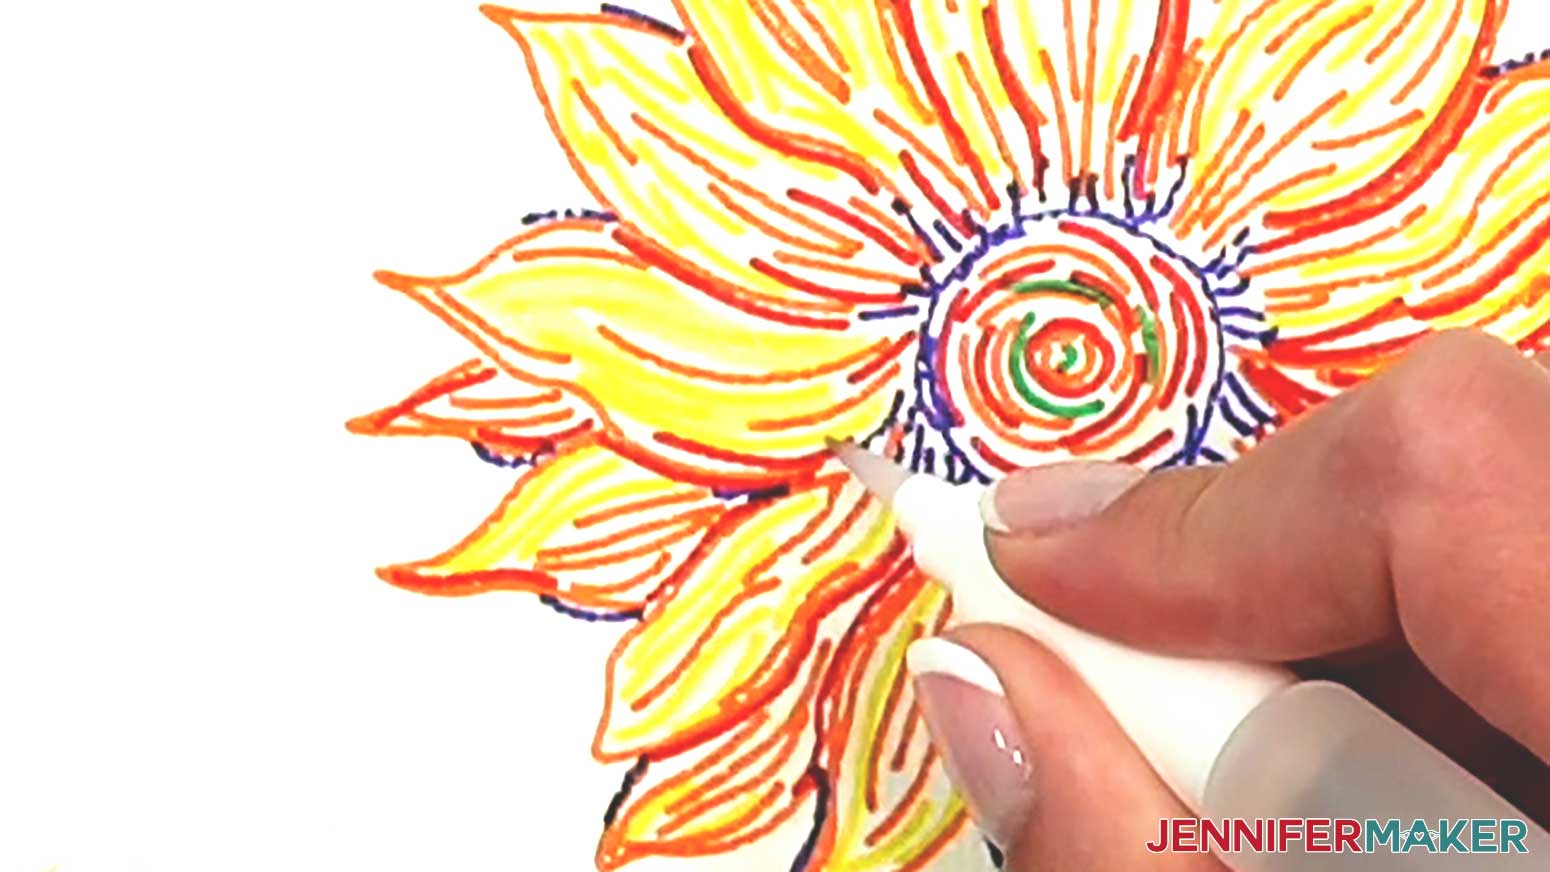 Fill in the yellow areas of the petals on the watercolor sunflower while taking care to not touch the other colors.